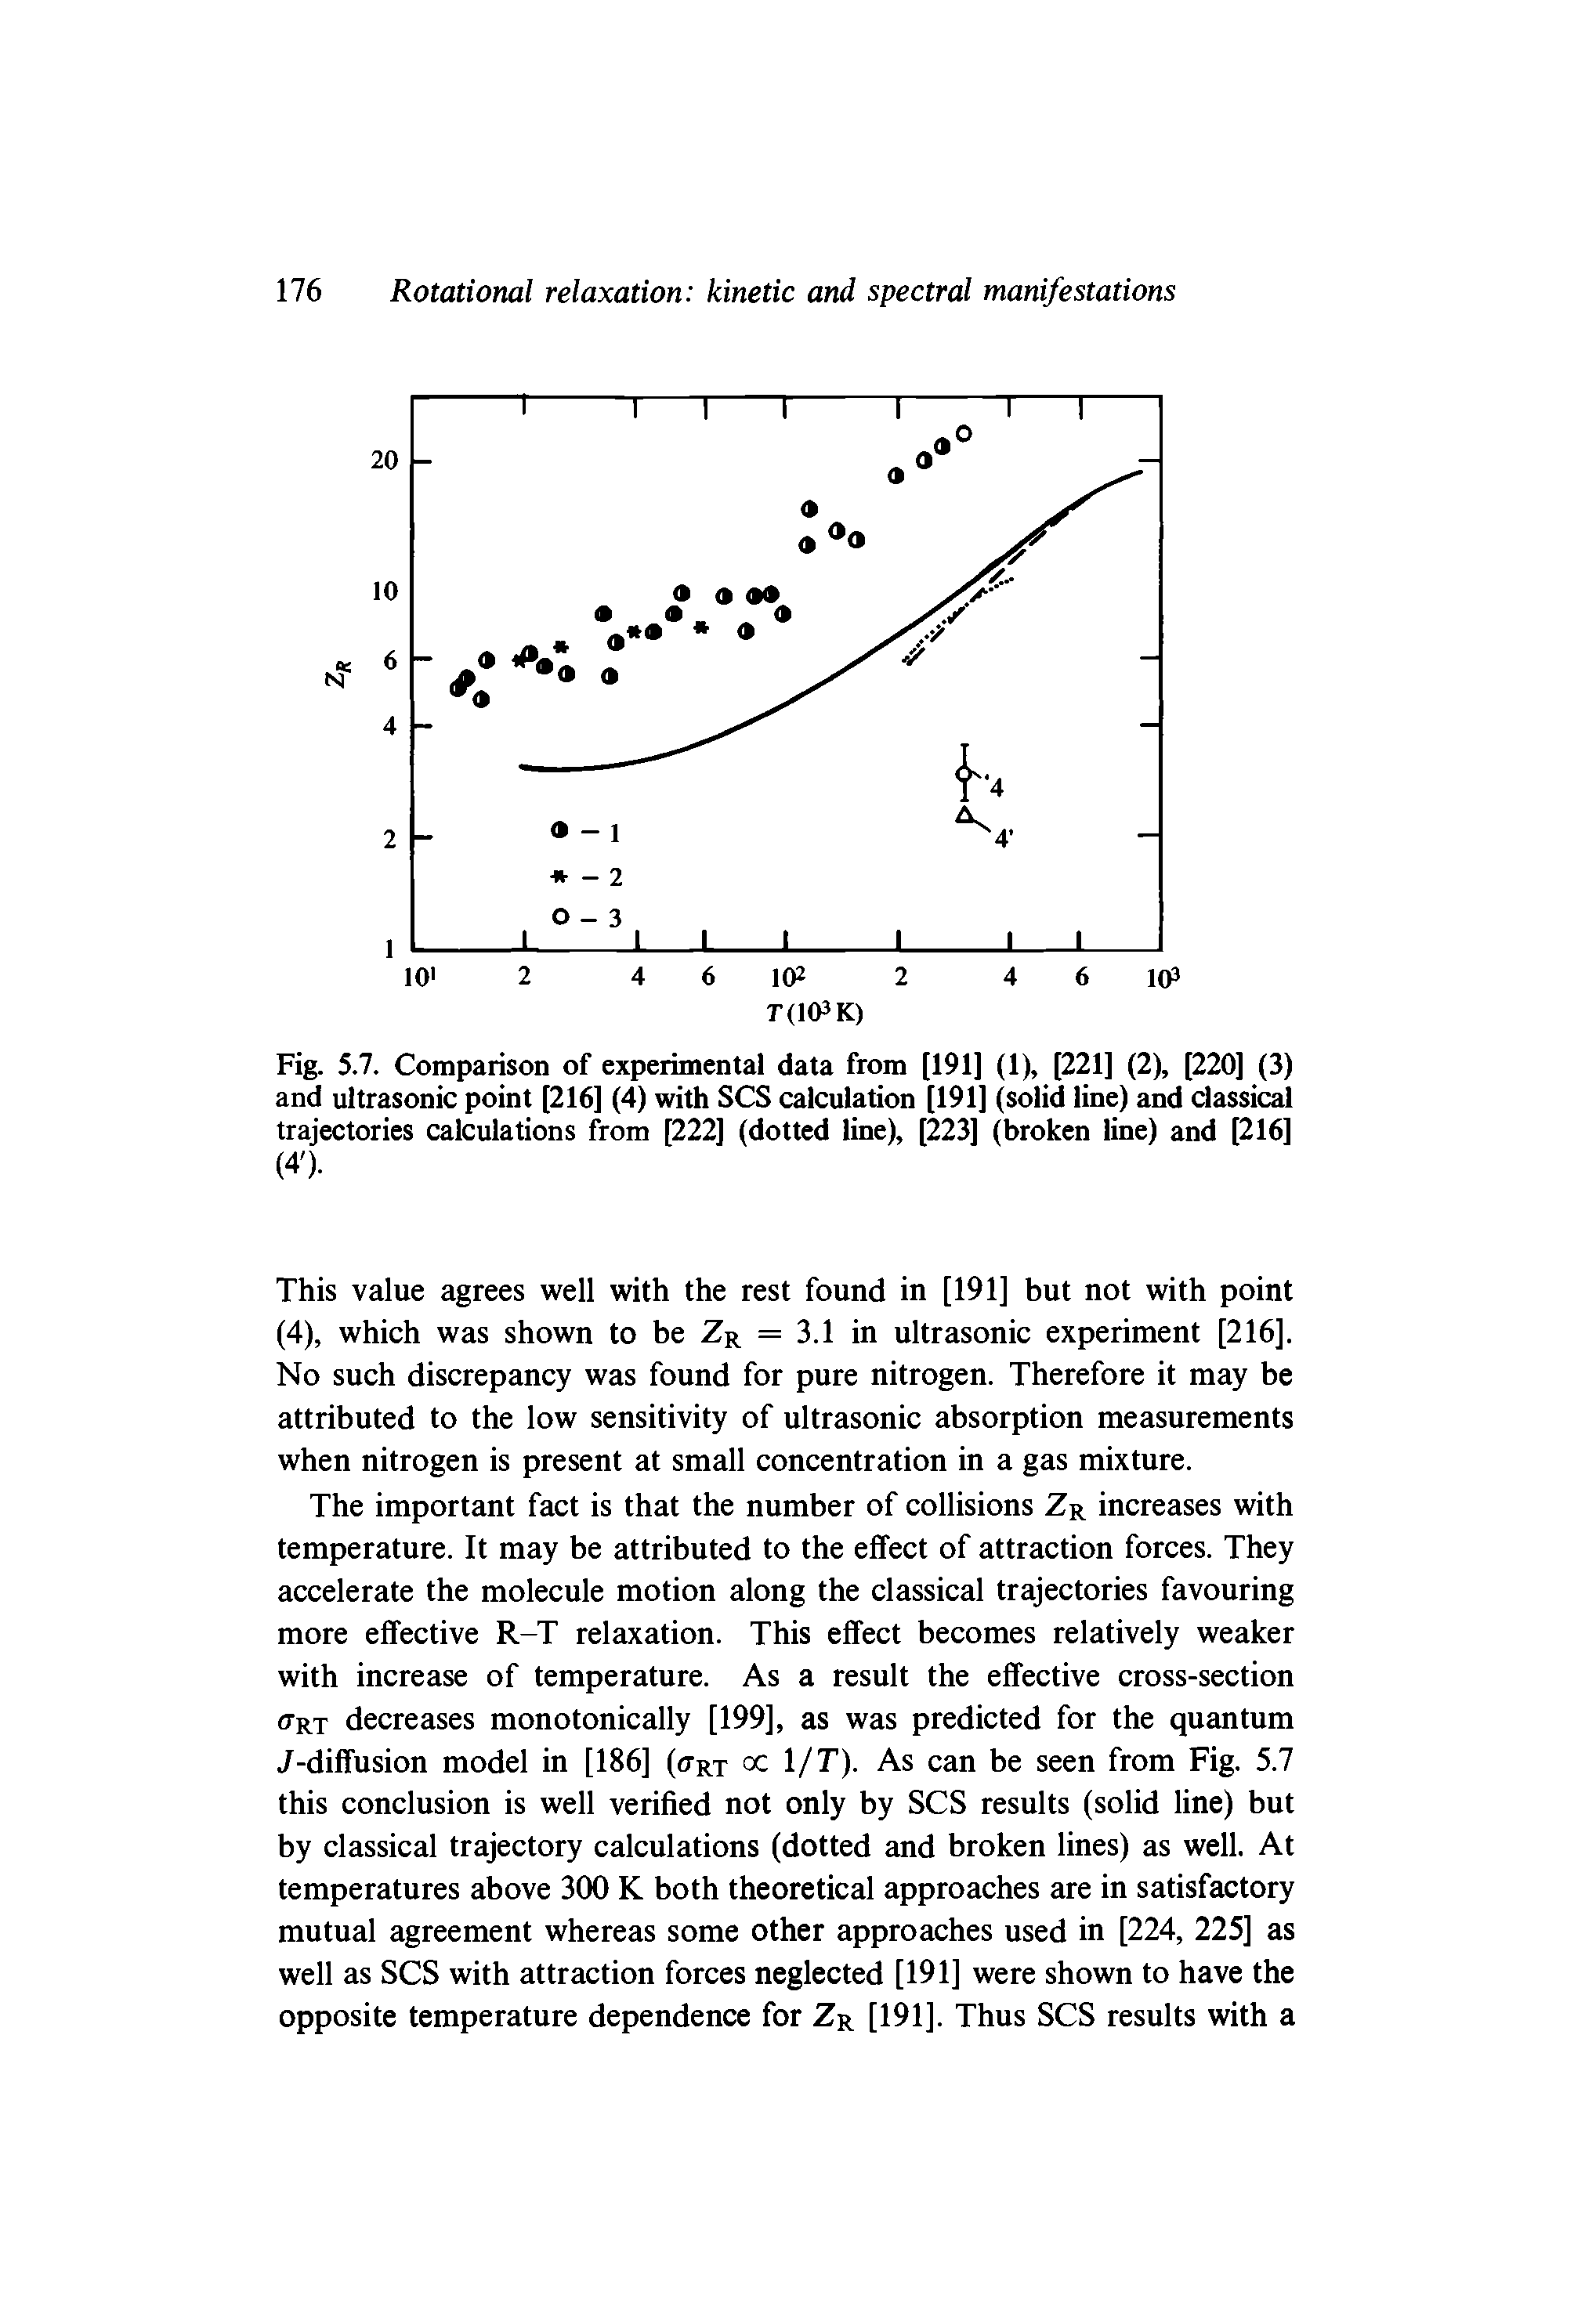 Fig. 5.7. Comparison of experimental data from [191] (1), [221] (2), [220] (3) and ultrasonic point [216] (4) with SCS calculation [191] (solid line) and classical trajectories calculations from [222] (dotted line), [223] (broken line) and [216] (4 ).